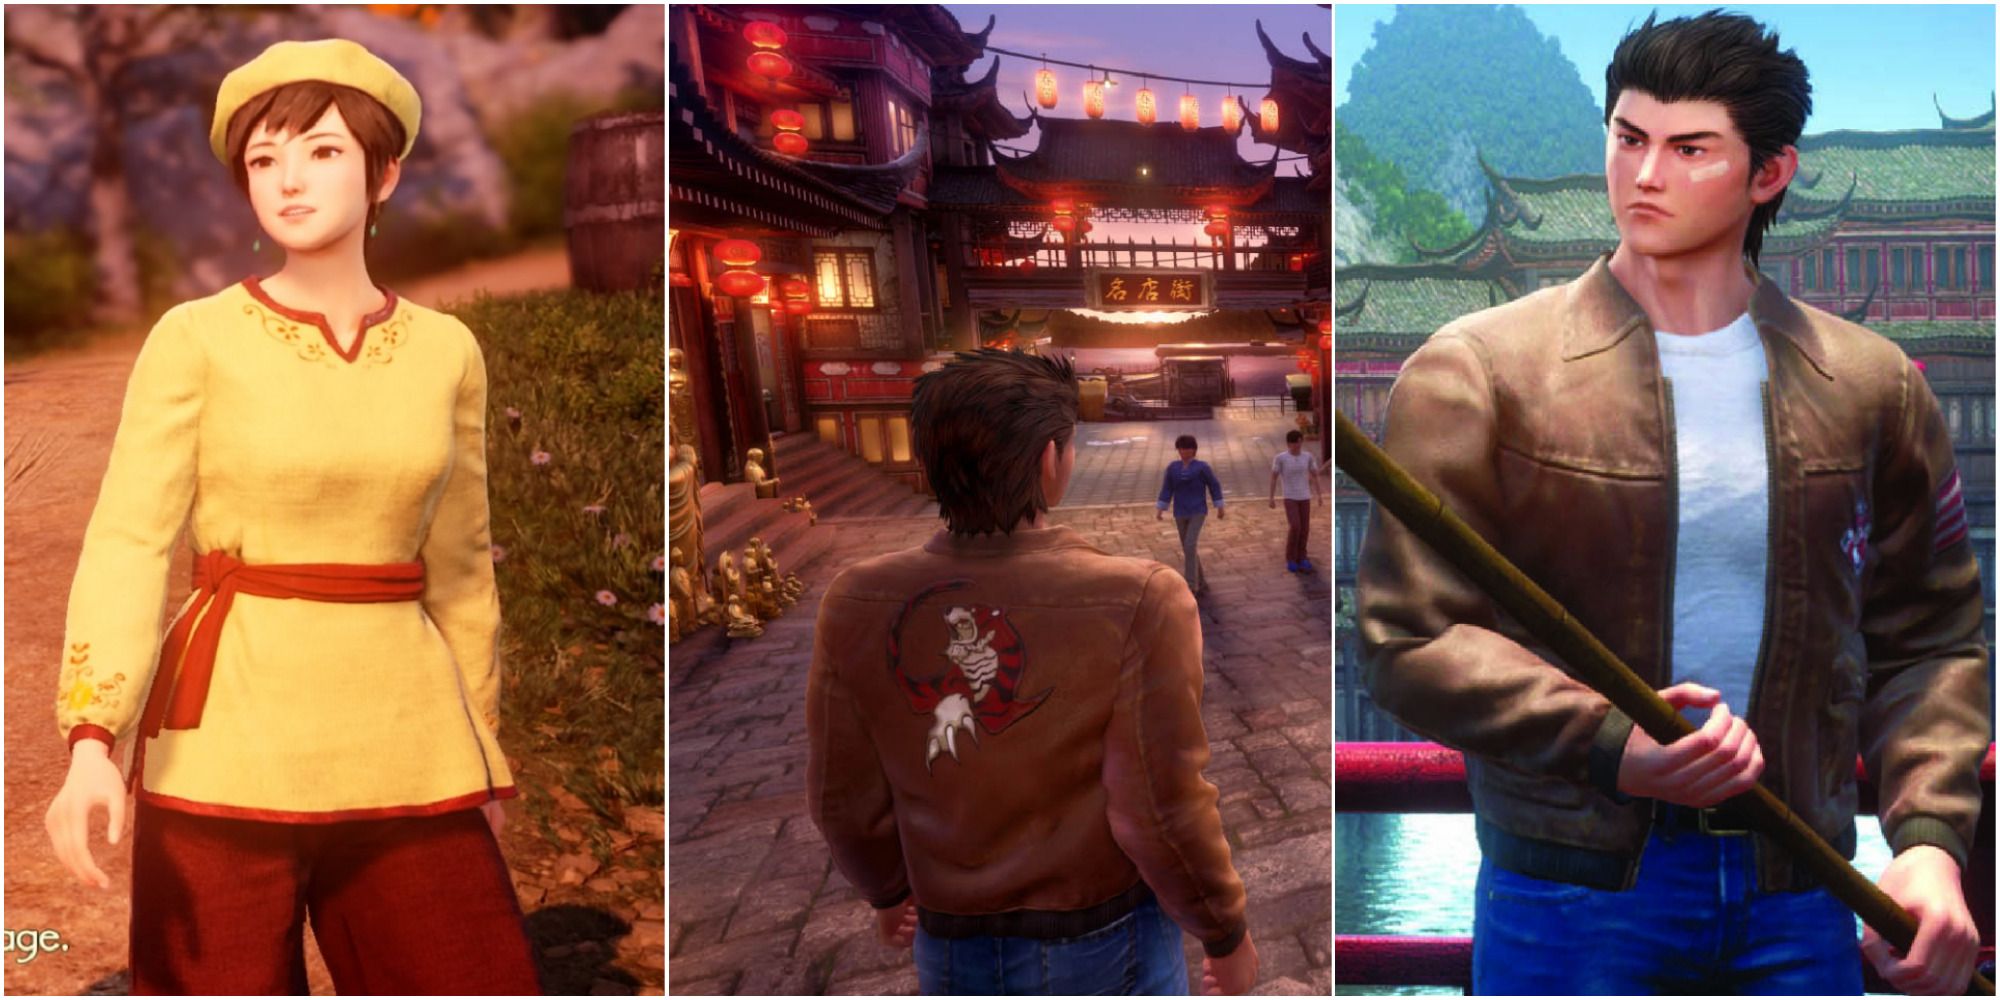 A collage of different images from Shenmue 3, including images of Ryo Hazuki and Shenhua